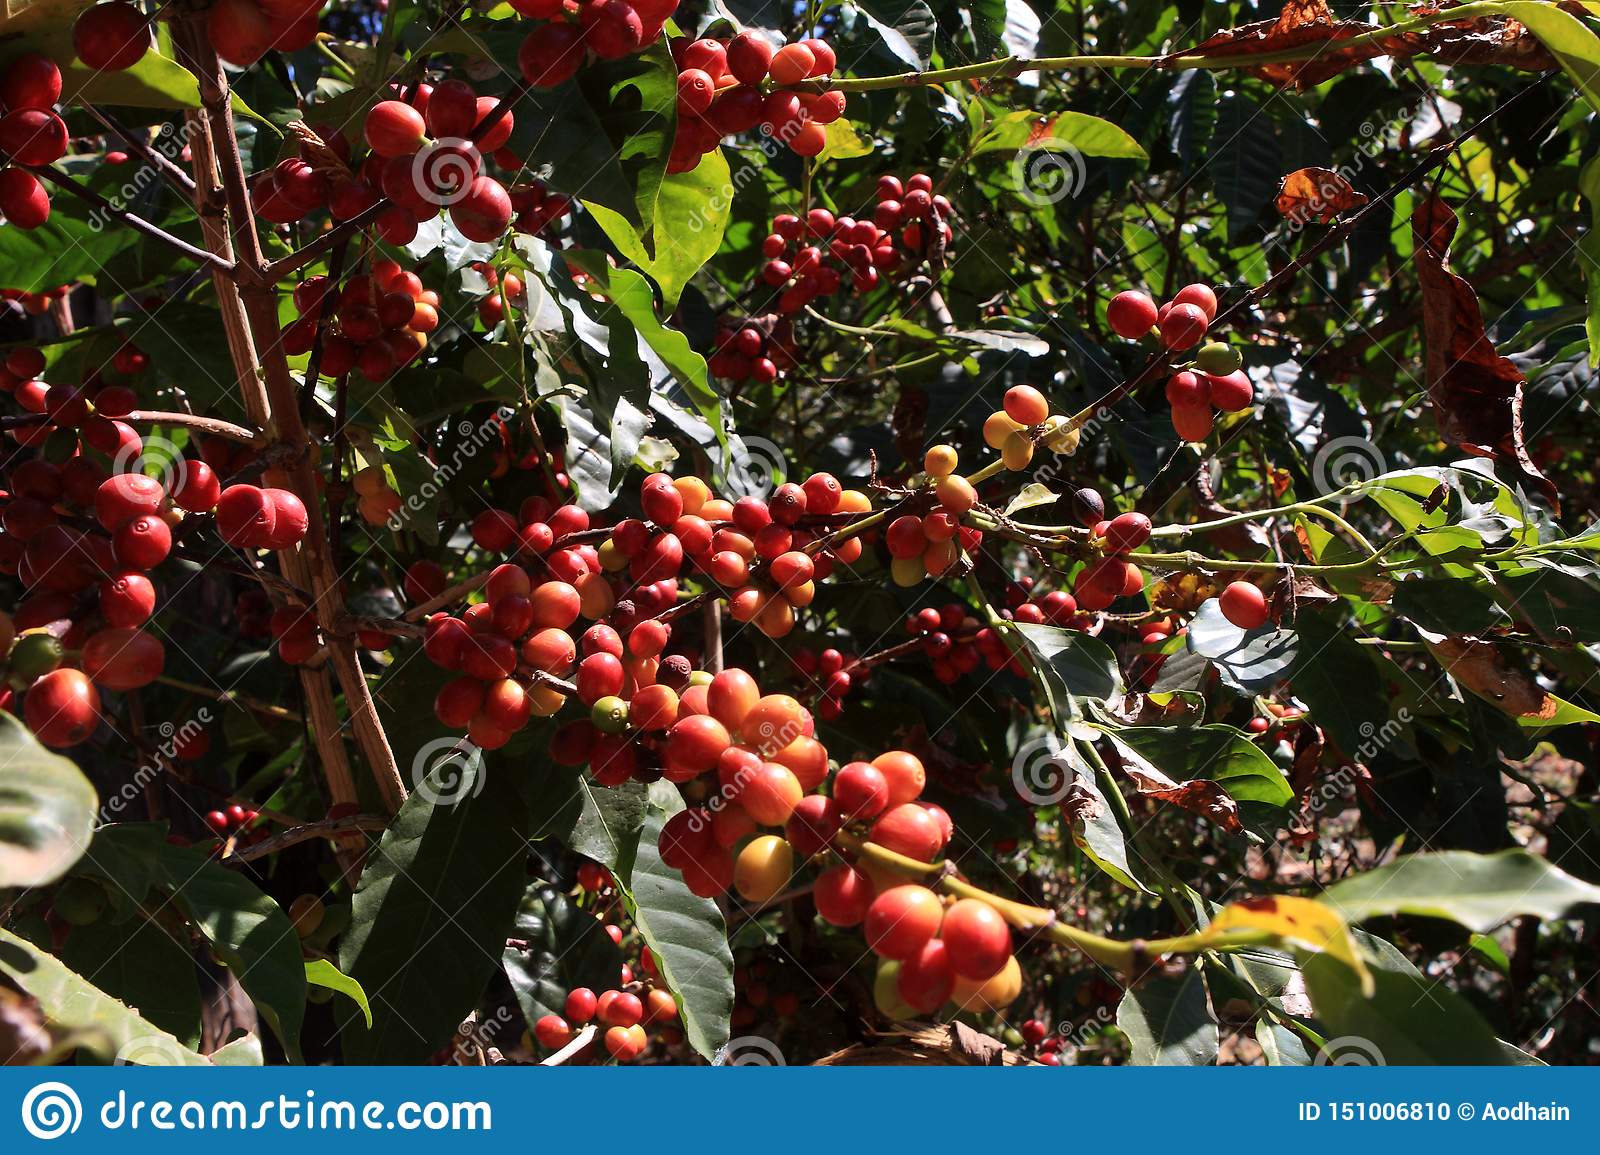 What is the history of coffee?